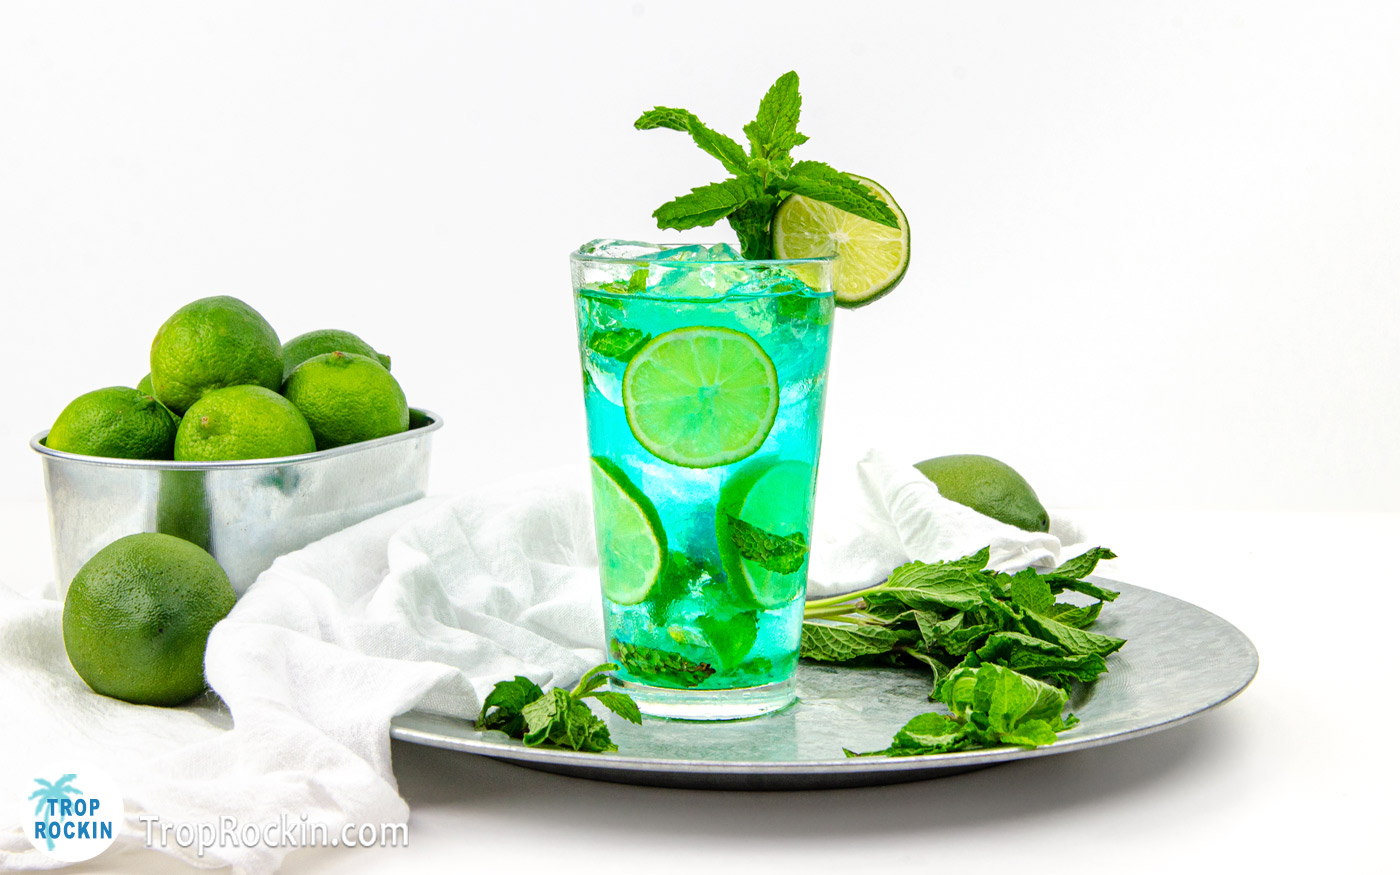 Blue mojito drink with fresh mint leaves and fresh lime wheels in the glass. Garnished with a mint sprig and slice of lime. The drink is sitting on a silver platter with fresh mint scattered around. A metal tub of limes is in the background.